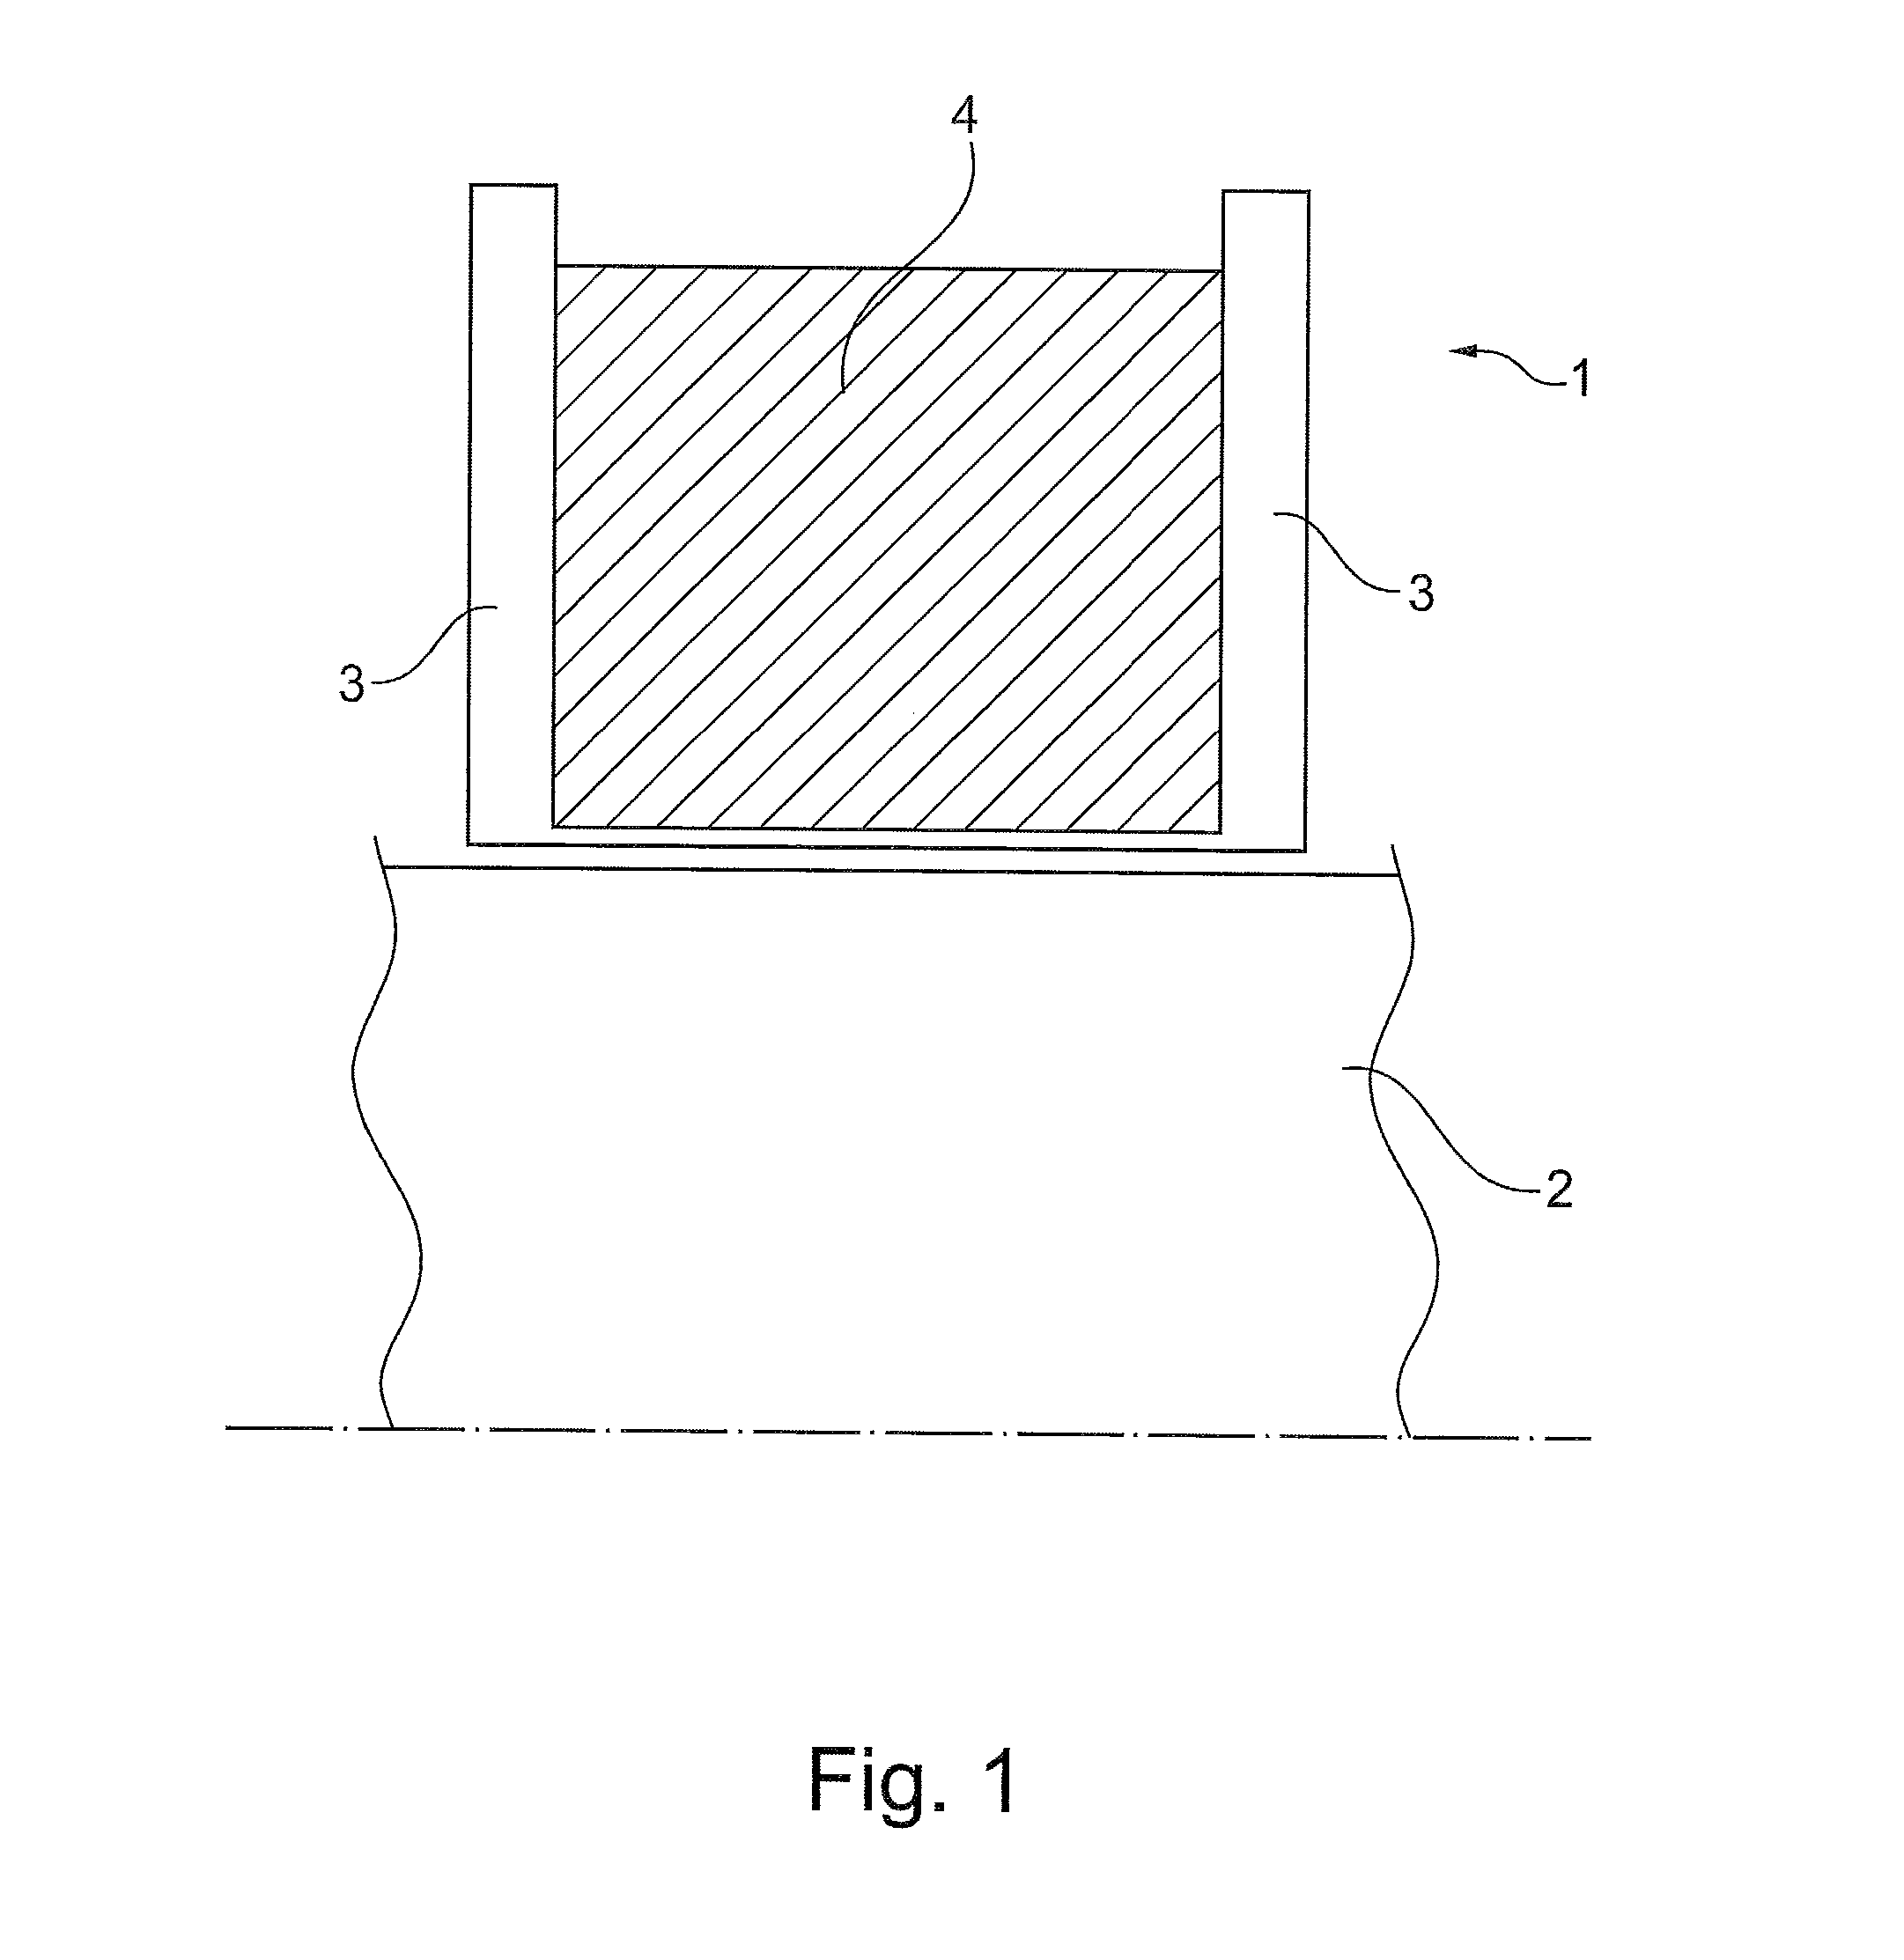 Encapsulated  magnet  assembly,  method  of  purging  a  gap rotary  machine  and  oil/gas  plant description